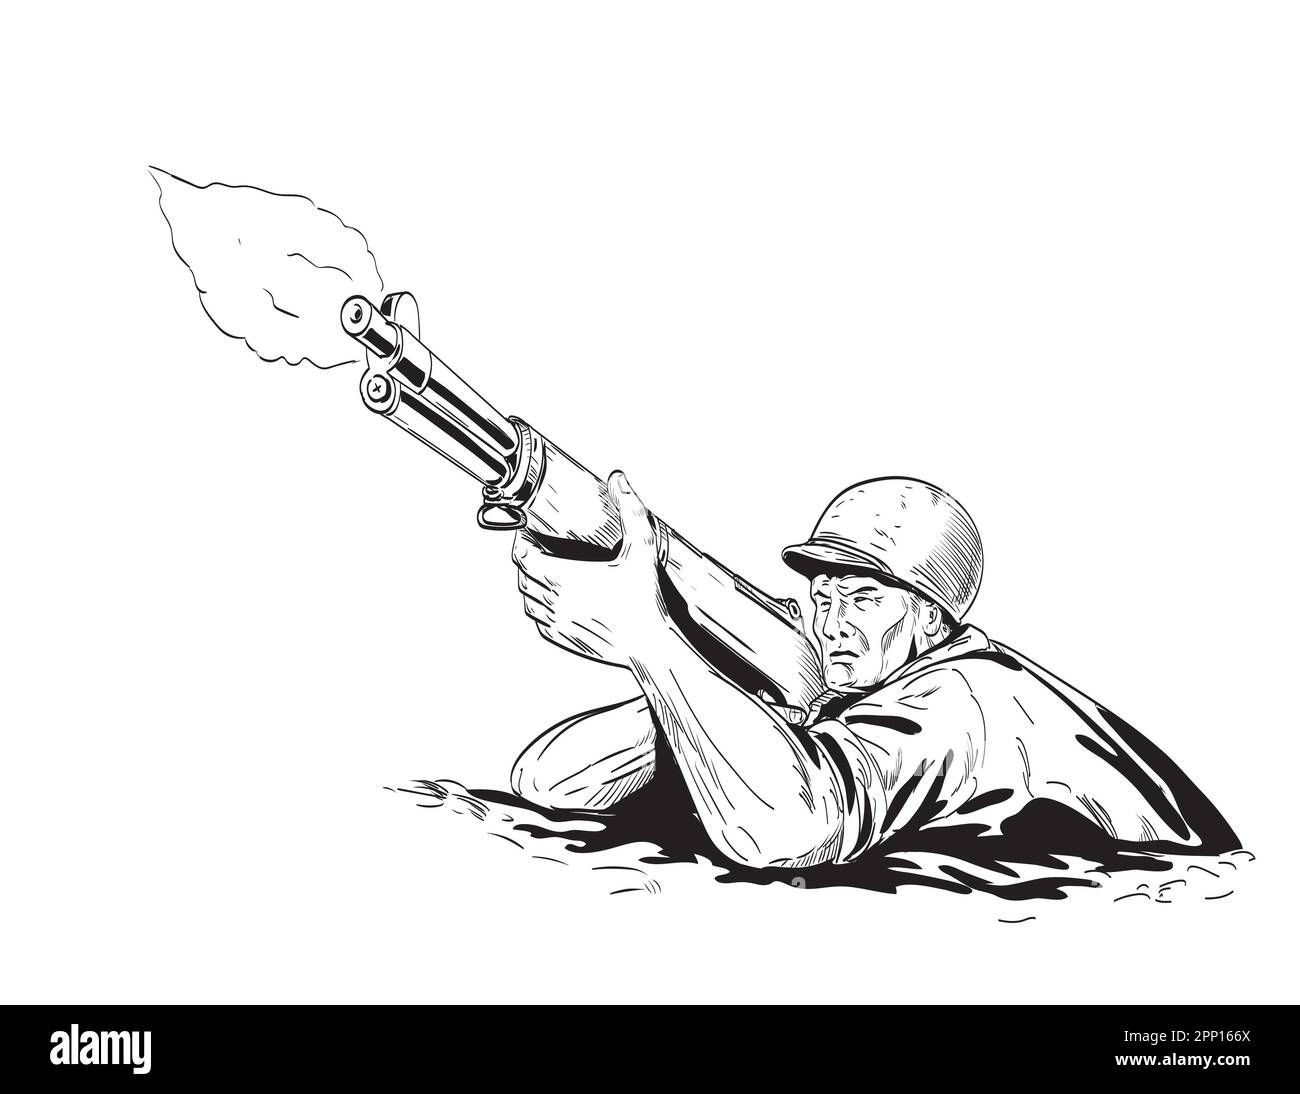 Comics style drawing or illustration of a World War Two American GI soldier aiming firing rifle viewed from front in low angle on isolated background Stock Photo